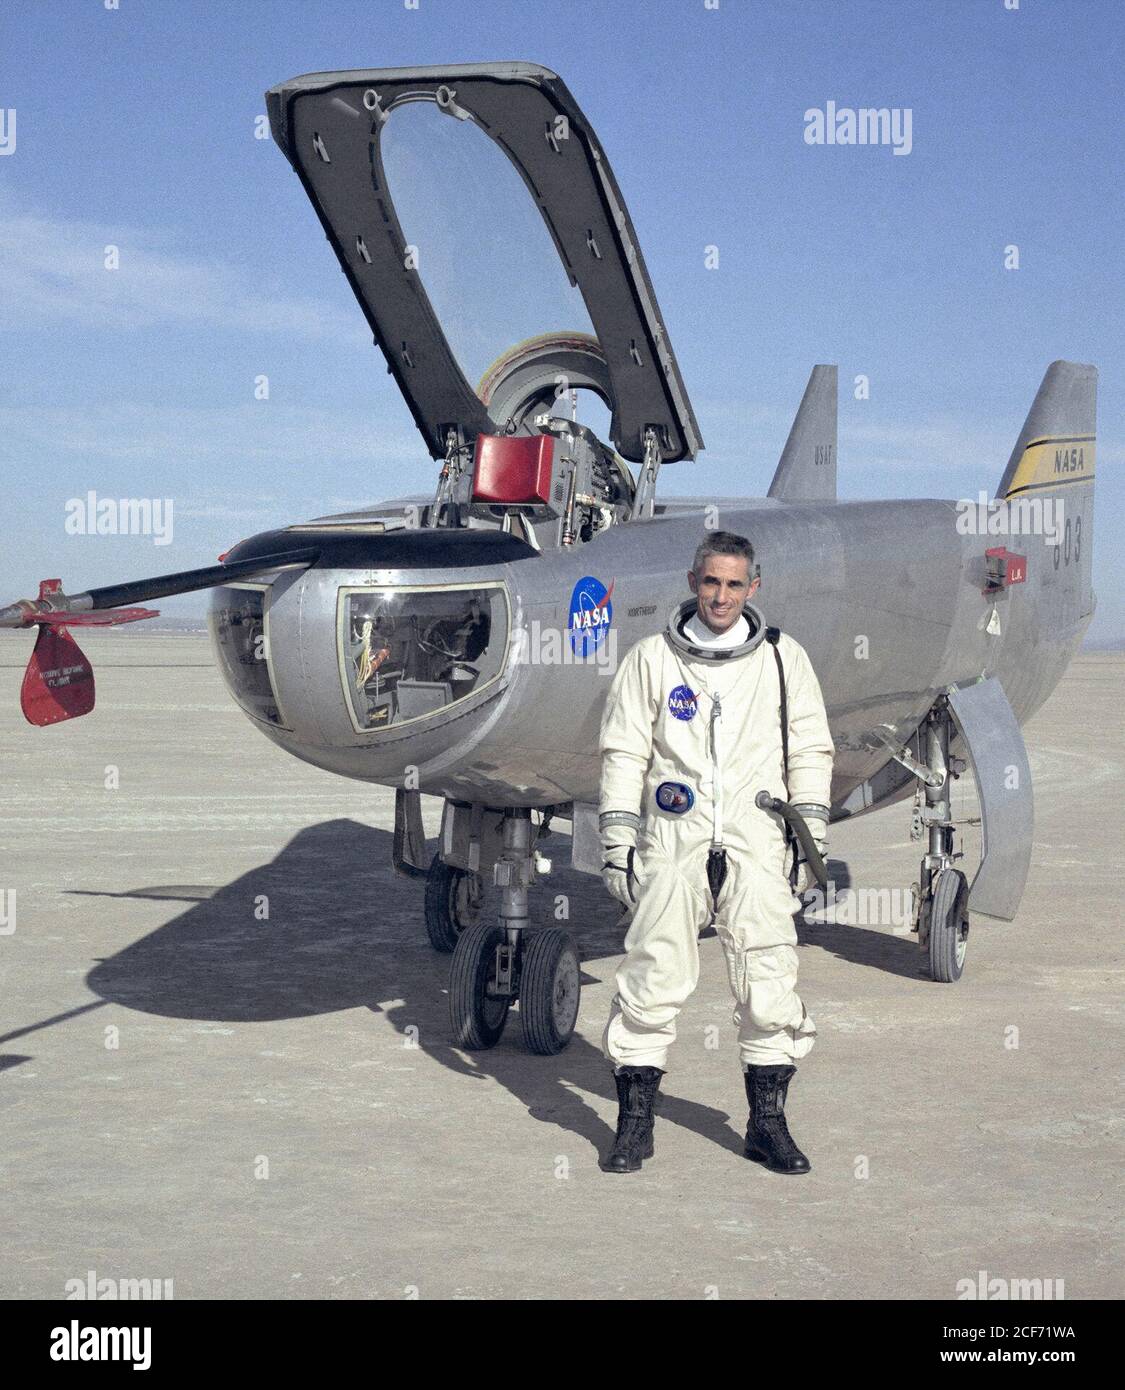 NASA research pilot John A. Manke is seen here in front of the M2-F3 lifting body. Manke was hired by NASA on May 25, 1962, as a flight research engineer. He was later assigned to the pilot's office and flew various support aircraft including the F-104, F-5D, F-111 and C-47. The M2-F3 reached a top speed of l,064 mph (Mach 1.6). Highest altitude reached by the vehicle was 7l,500 feet on December 21, 1972, the date of its last flight with NASA pilot John Manke at the controls. The information the lifting body program generated contributed to the data base that led to development of today's Spac Stock Photo